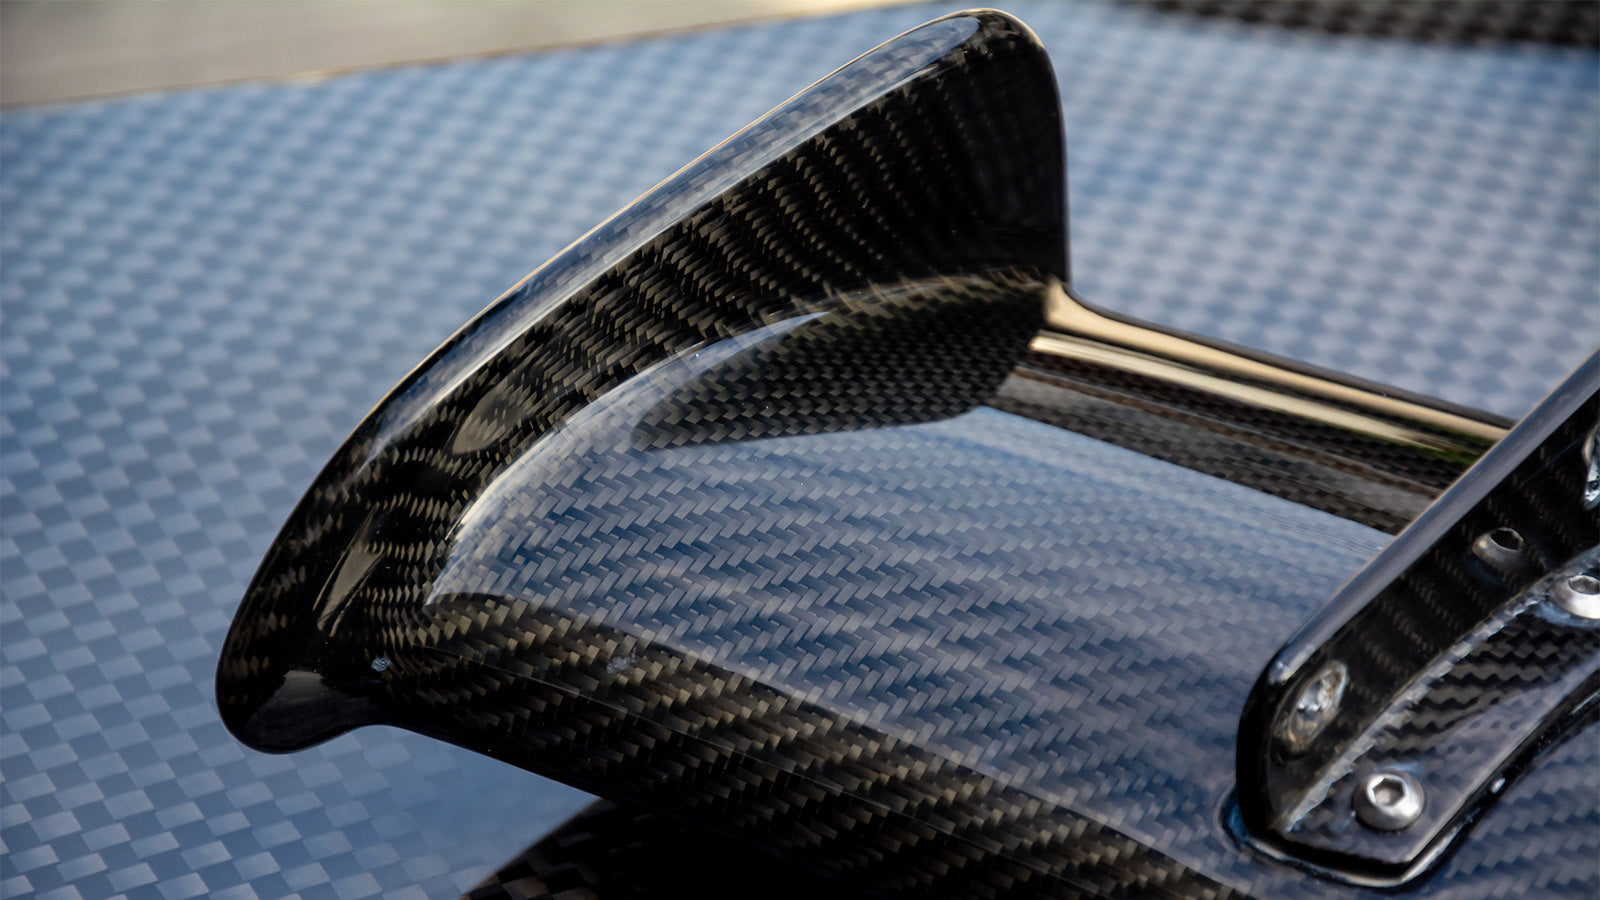 The difference between carbon fiber, aramid, and kevlar motorcycle gear